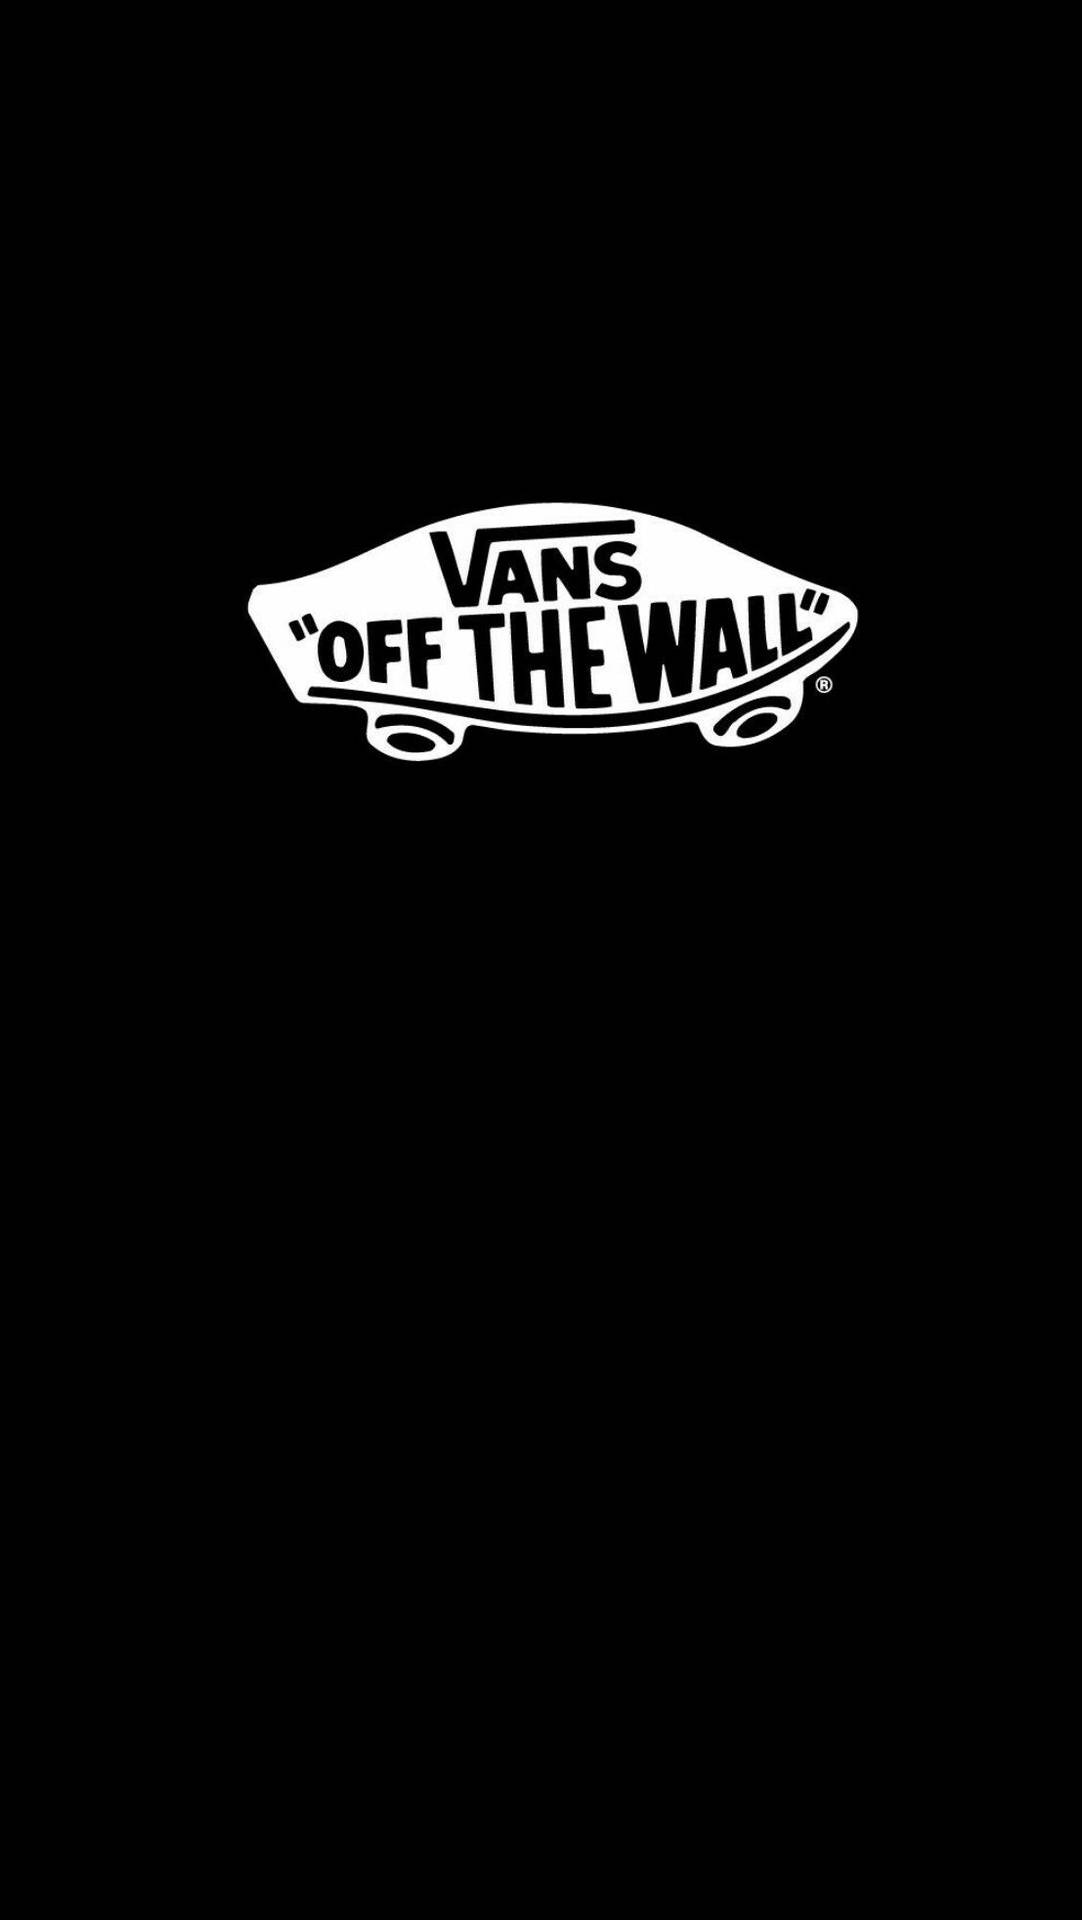 Vans 1107X1965 Wallpaper and Background Image